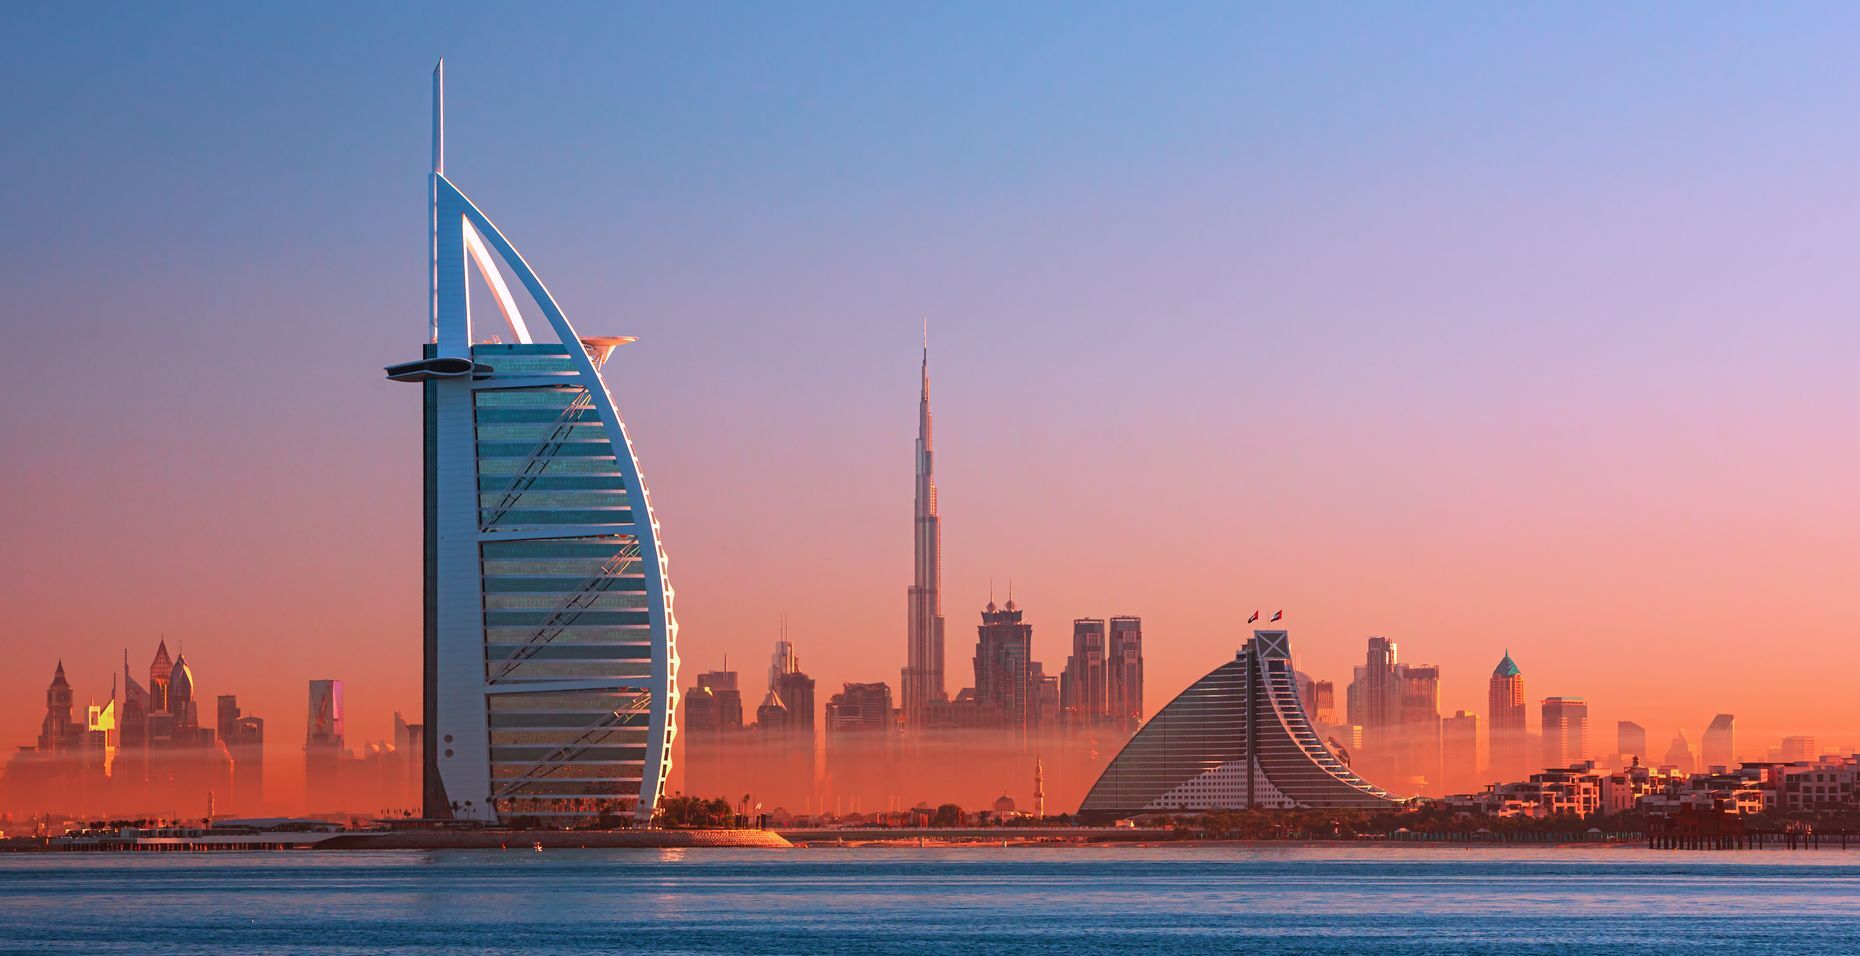 <p>It’s an engineering marvel of giant skyscrapers, luxury shopping, and interesting attractions plopped right down in a desert. However, Dubai is also a city with very strict laws and <a href="https://www.hrw.org/world-report/2022/country-chapters/united-arab-emirates">dubious human rights</a>. It is the safest city in the Middle East, but many countries warn their citizens of the risk of <a href="https://travel.state.gov/content/travel/en/traveladvisories/traveladvisories/united-arab-emirates-travel-advisory.html">terrorism</a> while visiting. And while violent crime directed at tourists is rare, there is a long list of <a href="https://www.bhtp.com/blog/safe-travel-to-dubai/">common actions</a> that are considered illegal here. </p>